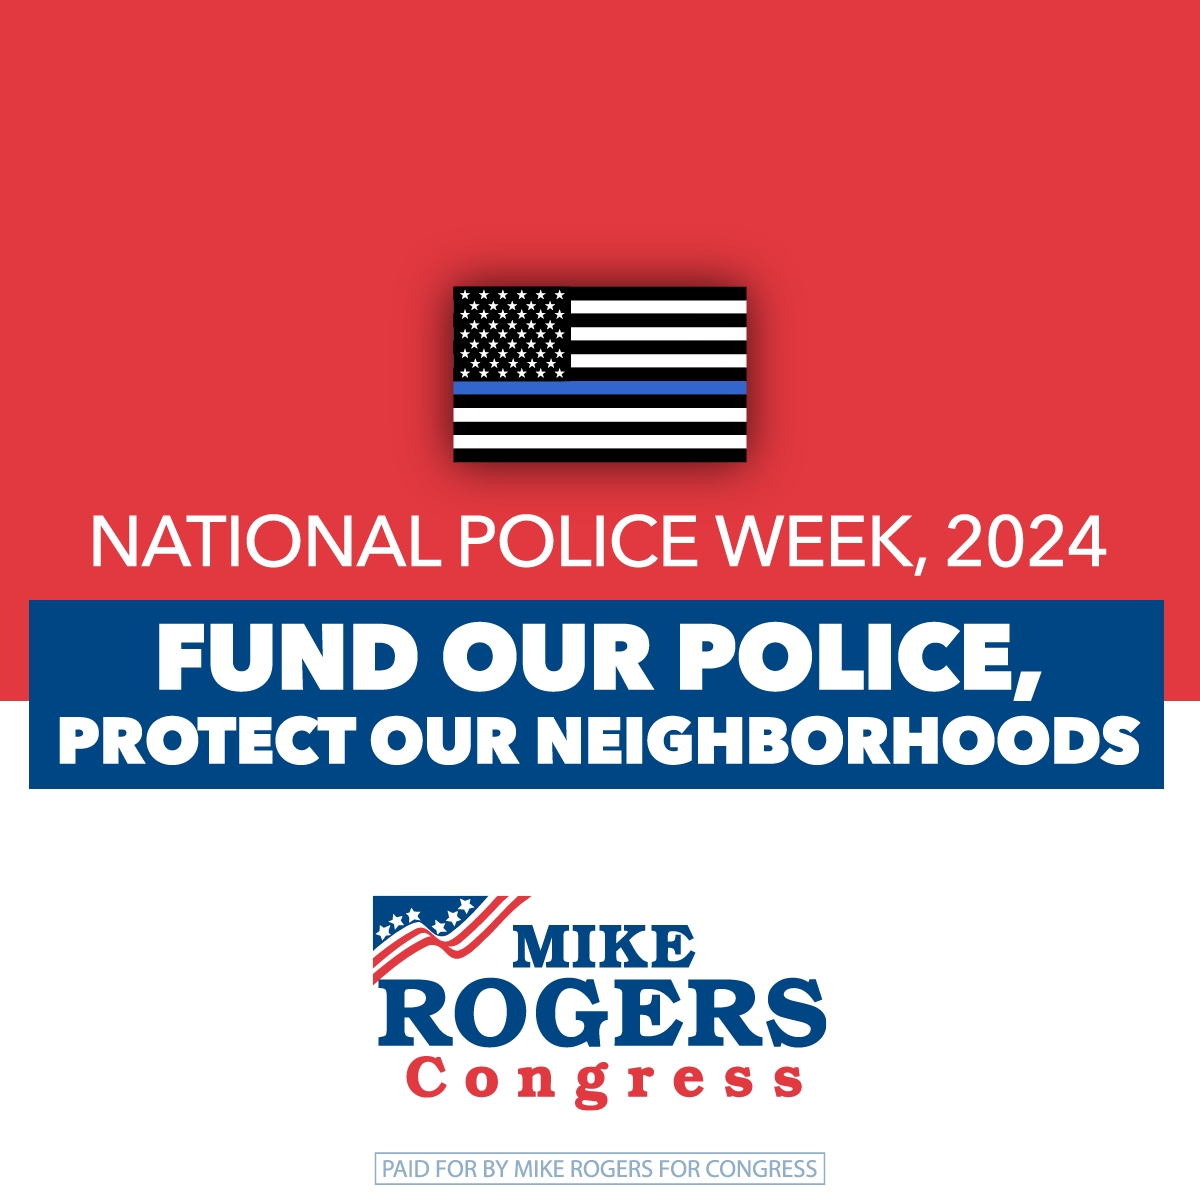 Our police officers are more important than ever thanks to liberal politicians who want to defund and disarm them every chance they get. I’ll always be proud to support our brave law enforcement! #AL03 thanks you for keeping us safe.